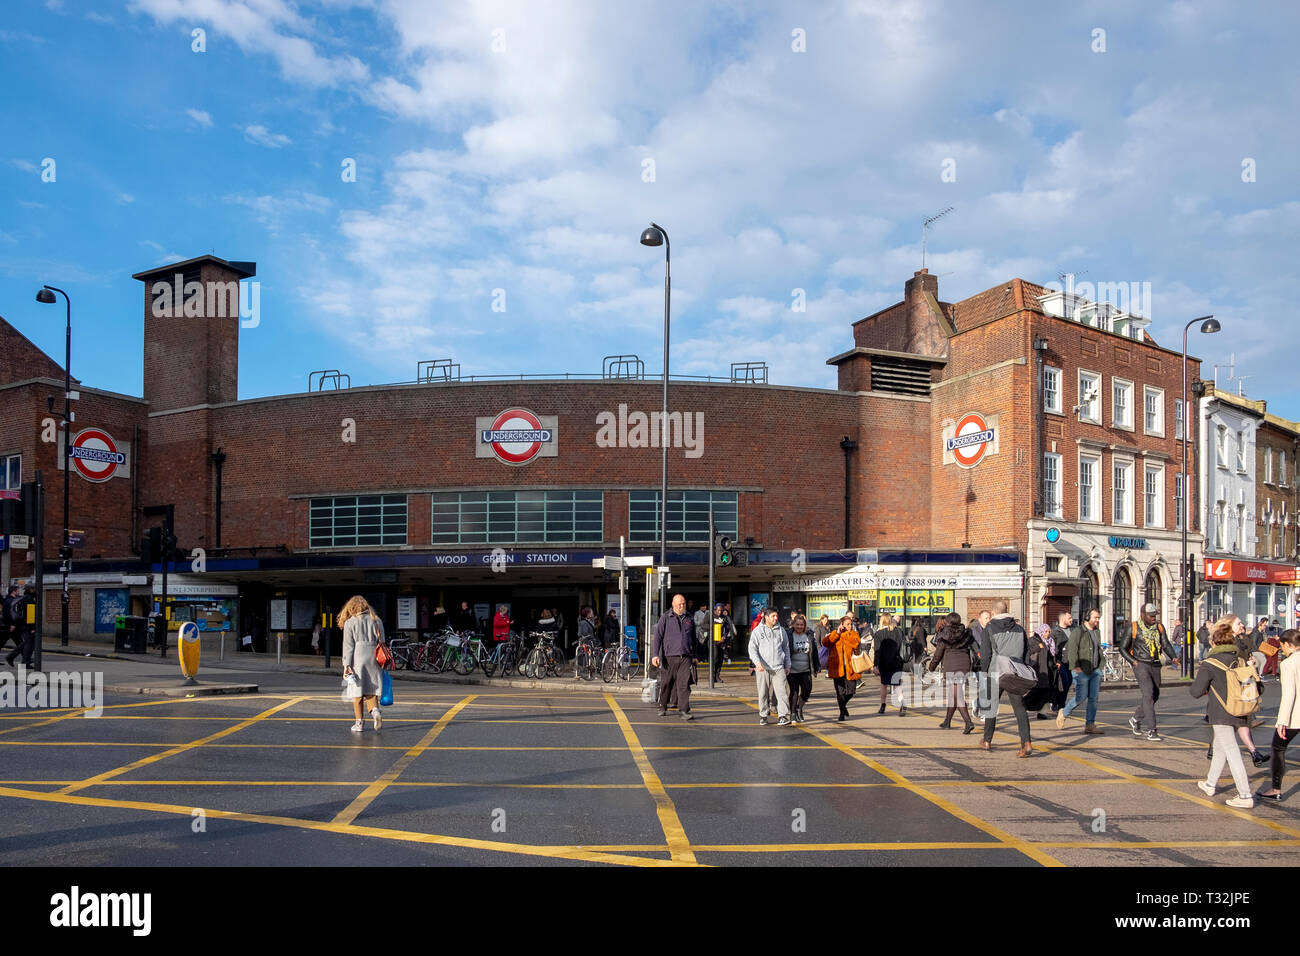 The evening scene at the junction outside Wood Green tube station Stock Photo